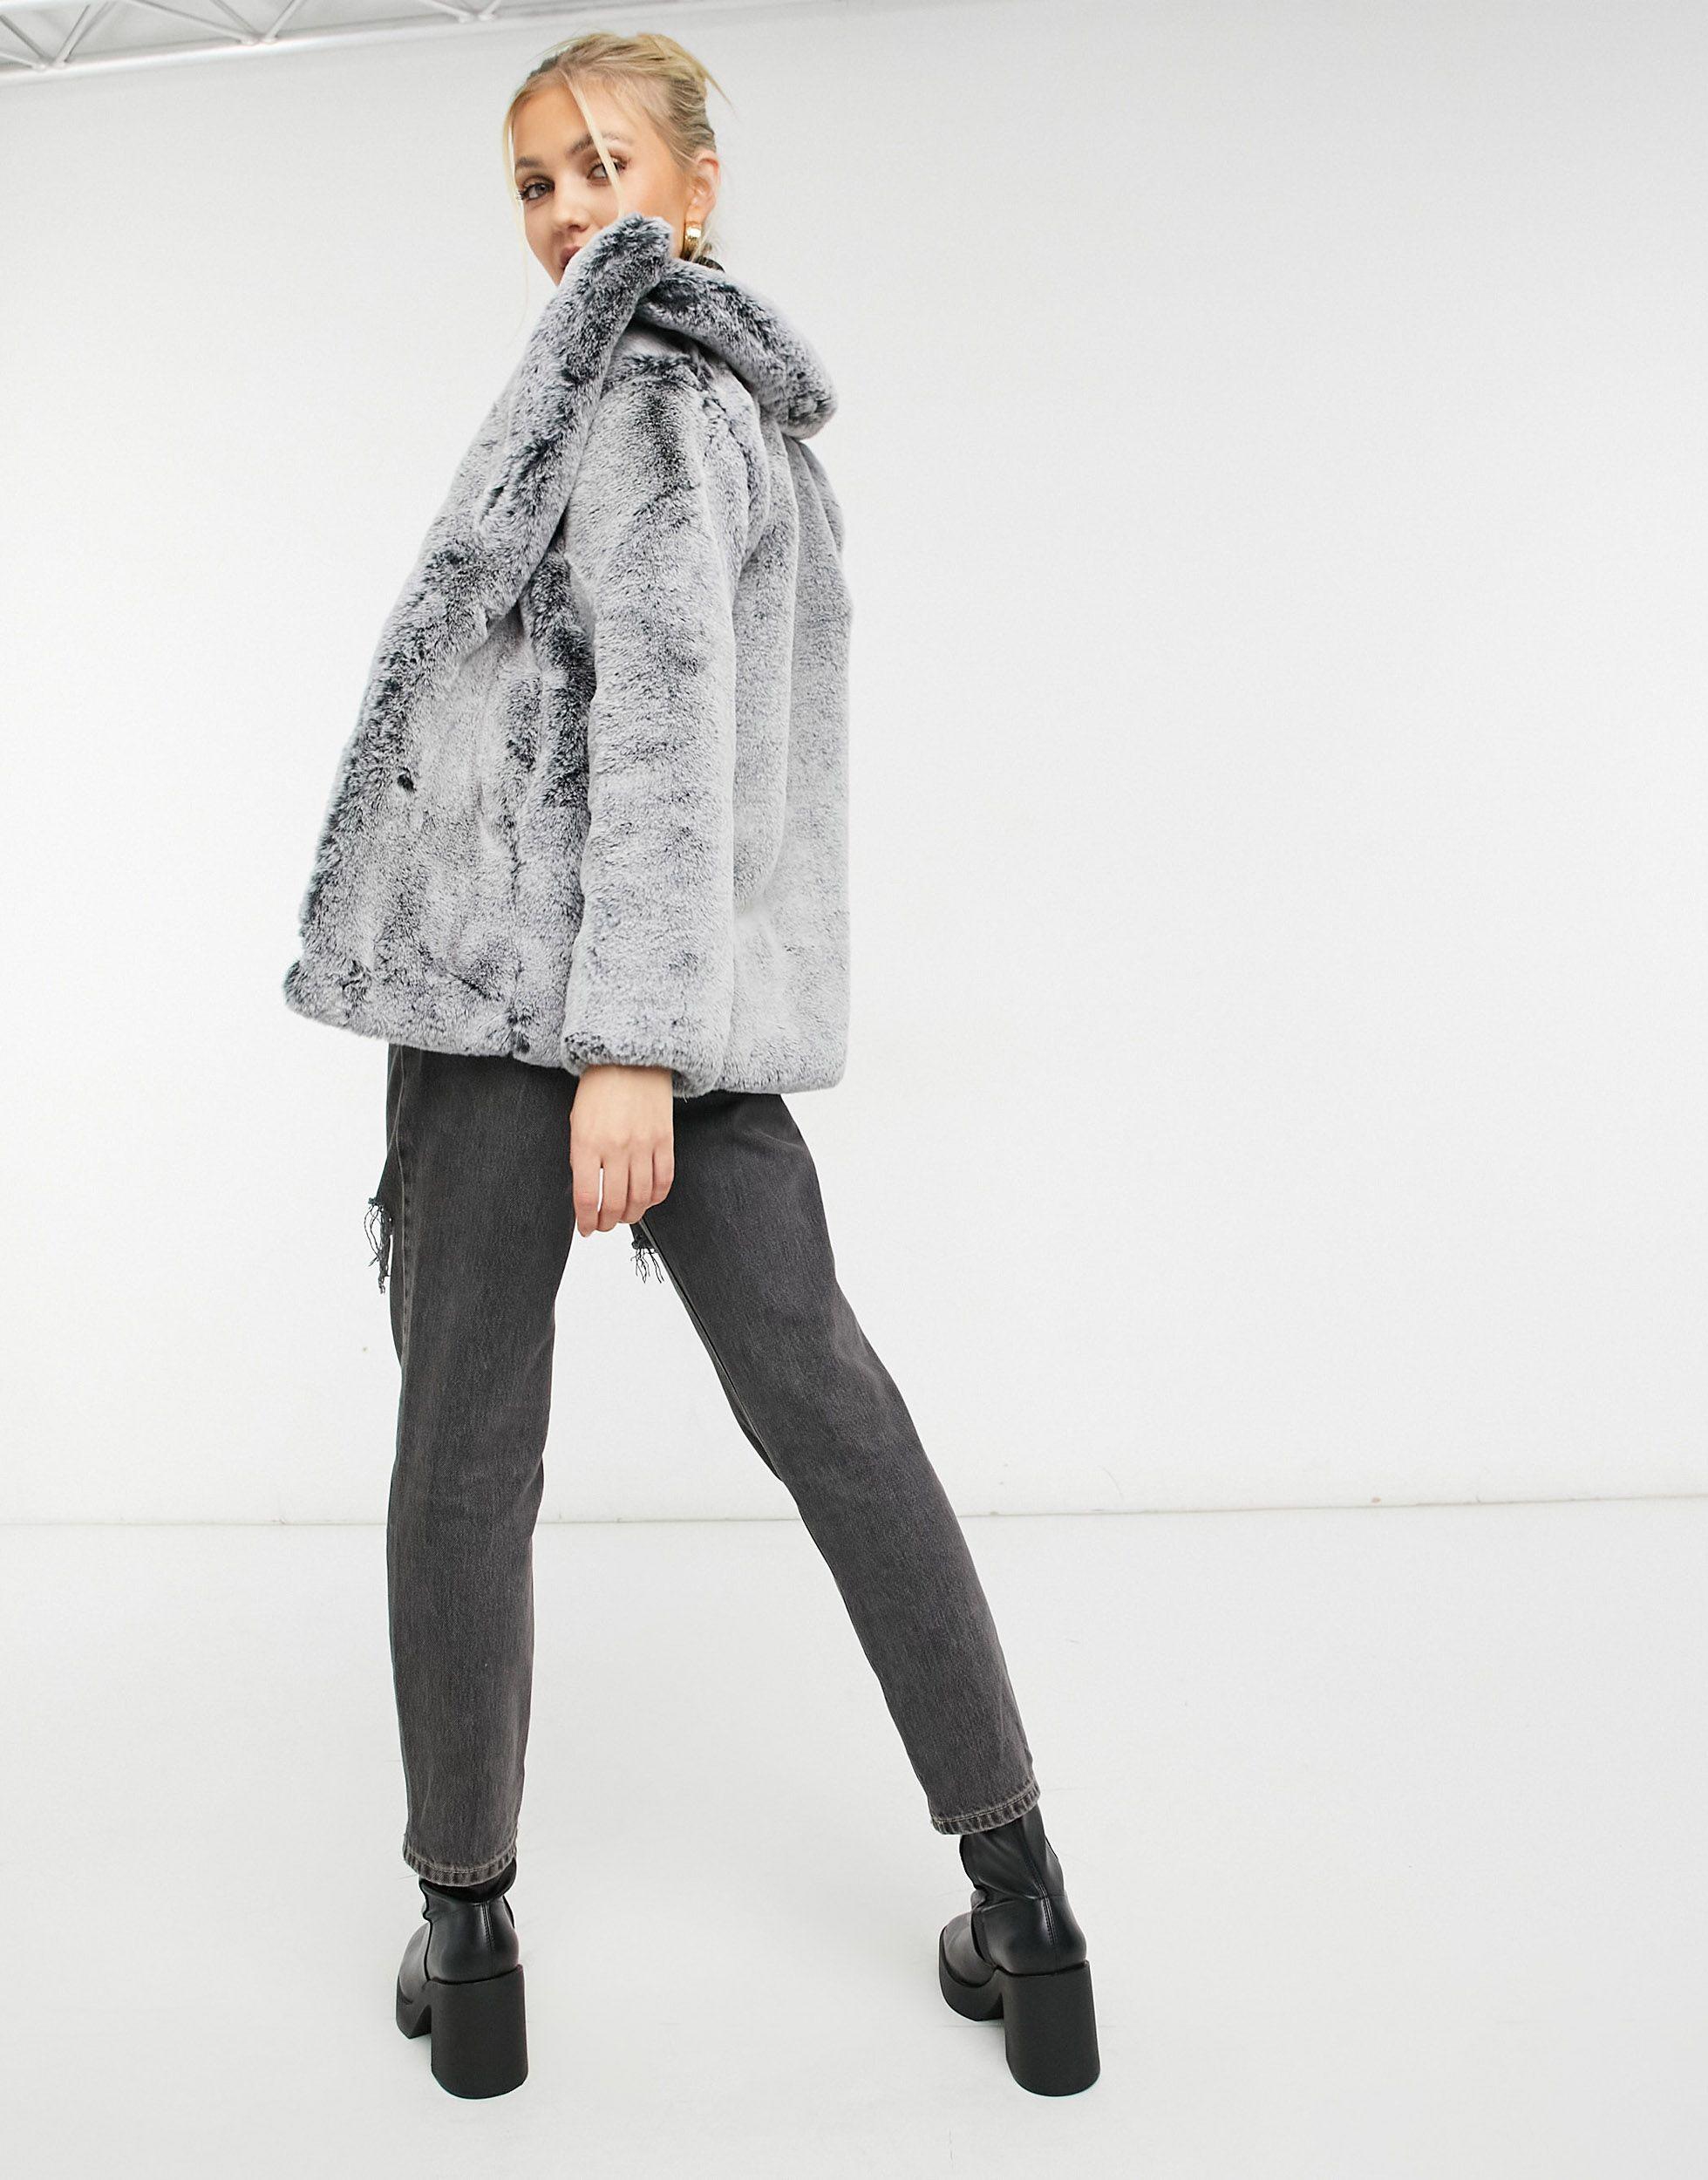 TOPSHOP Two Tone Faux Fur Jacket in Grey (Gray) - Lyst